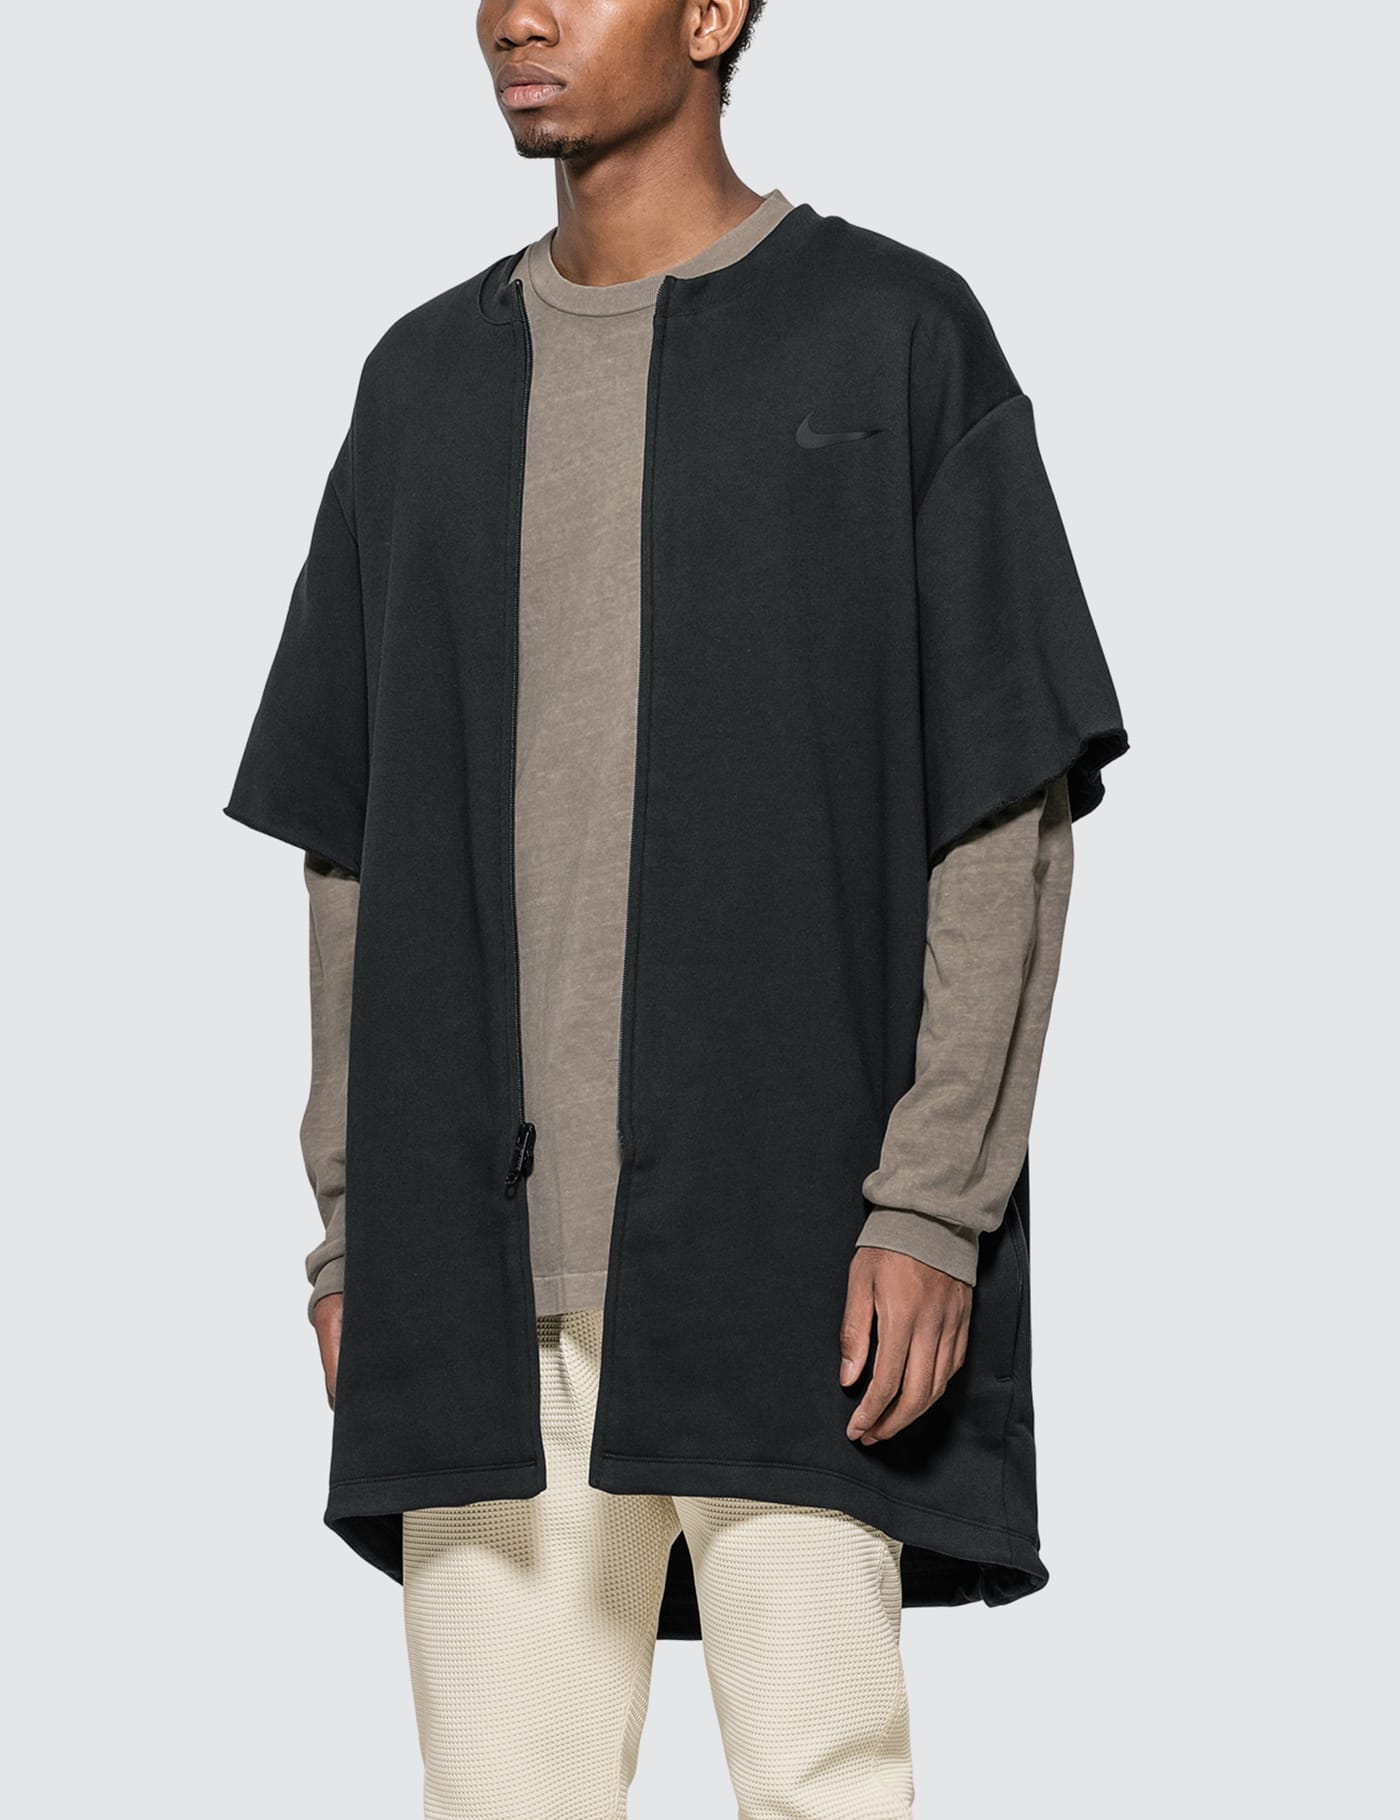 Nike - Fear Of God x Nike Warm Up Top | HBX - Globally Curated 